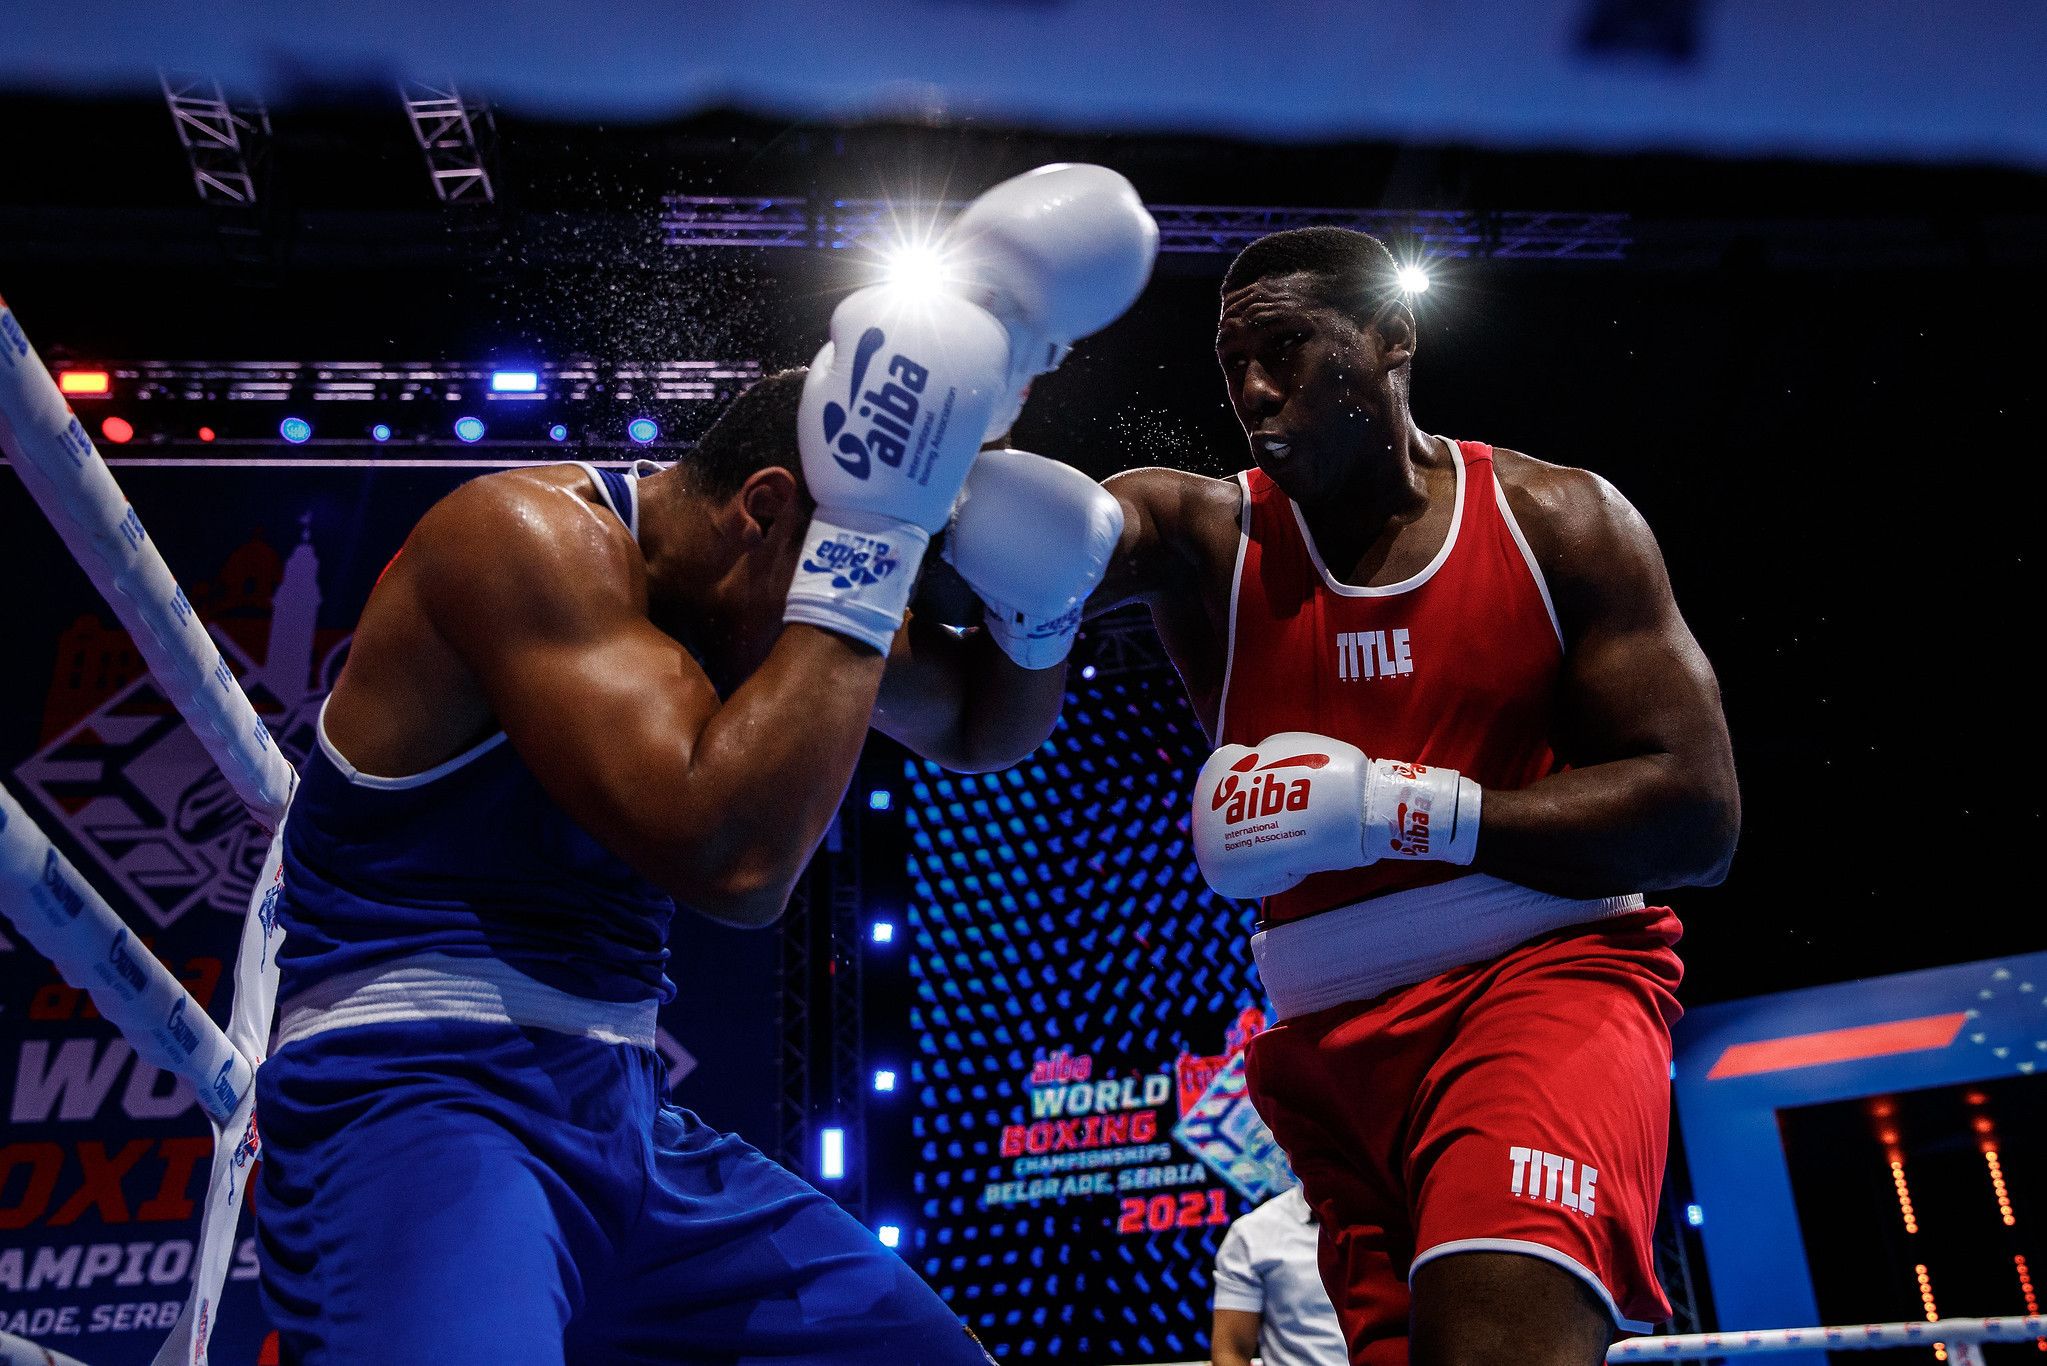 Emotions high as Iran and Trinidad and Tobago secure first Men's World Boxing Championships medals